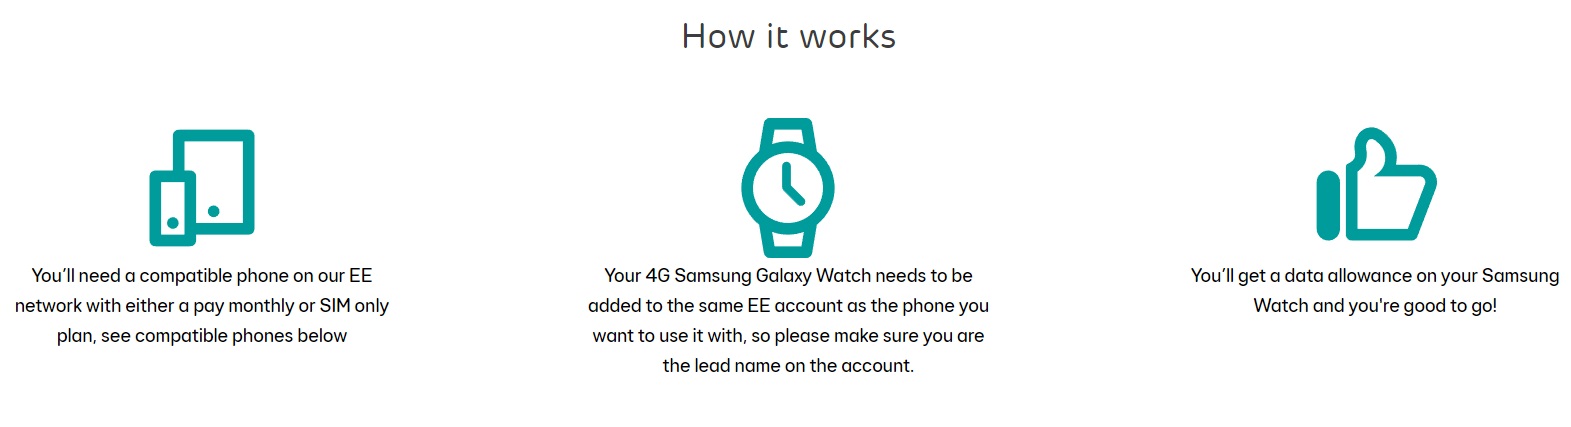 Samsung Galaxy Watch5 Pro plans - How it works